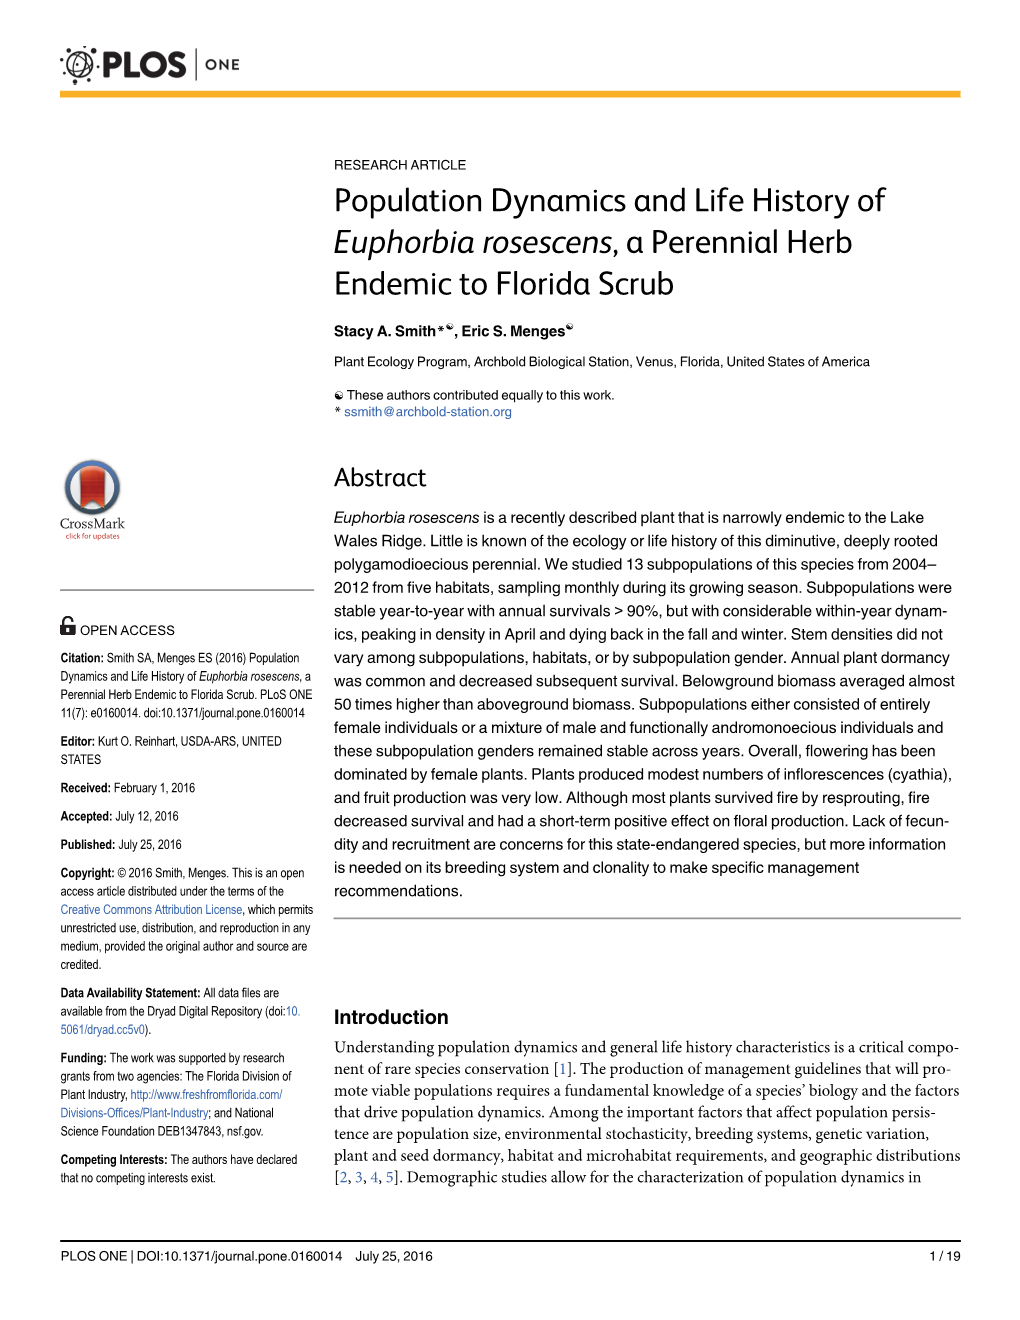 Population Dynamics and Life History of Euphorbia Rosescens, a Perennial Herb Endemic to Florida Scrub